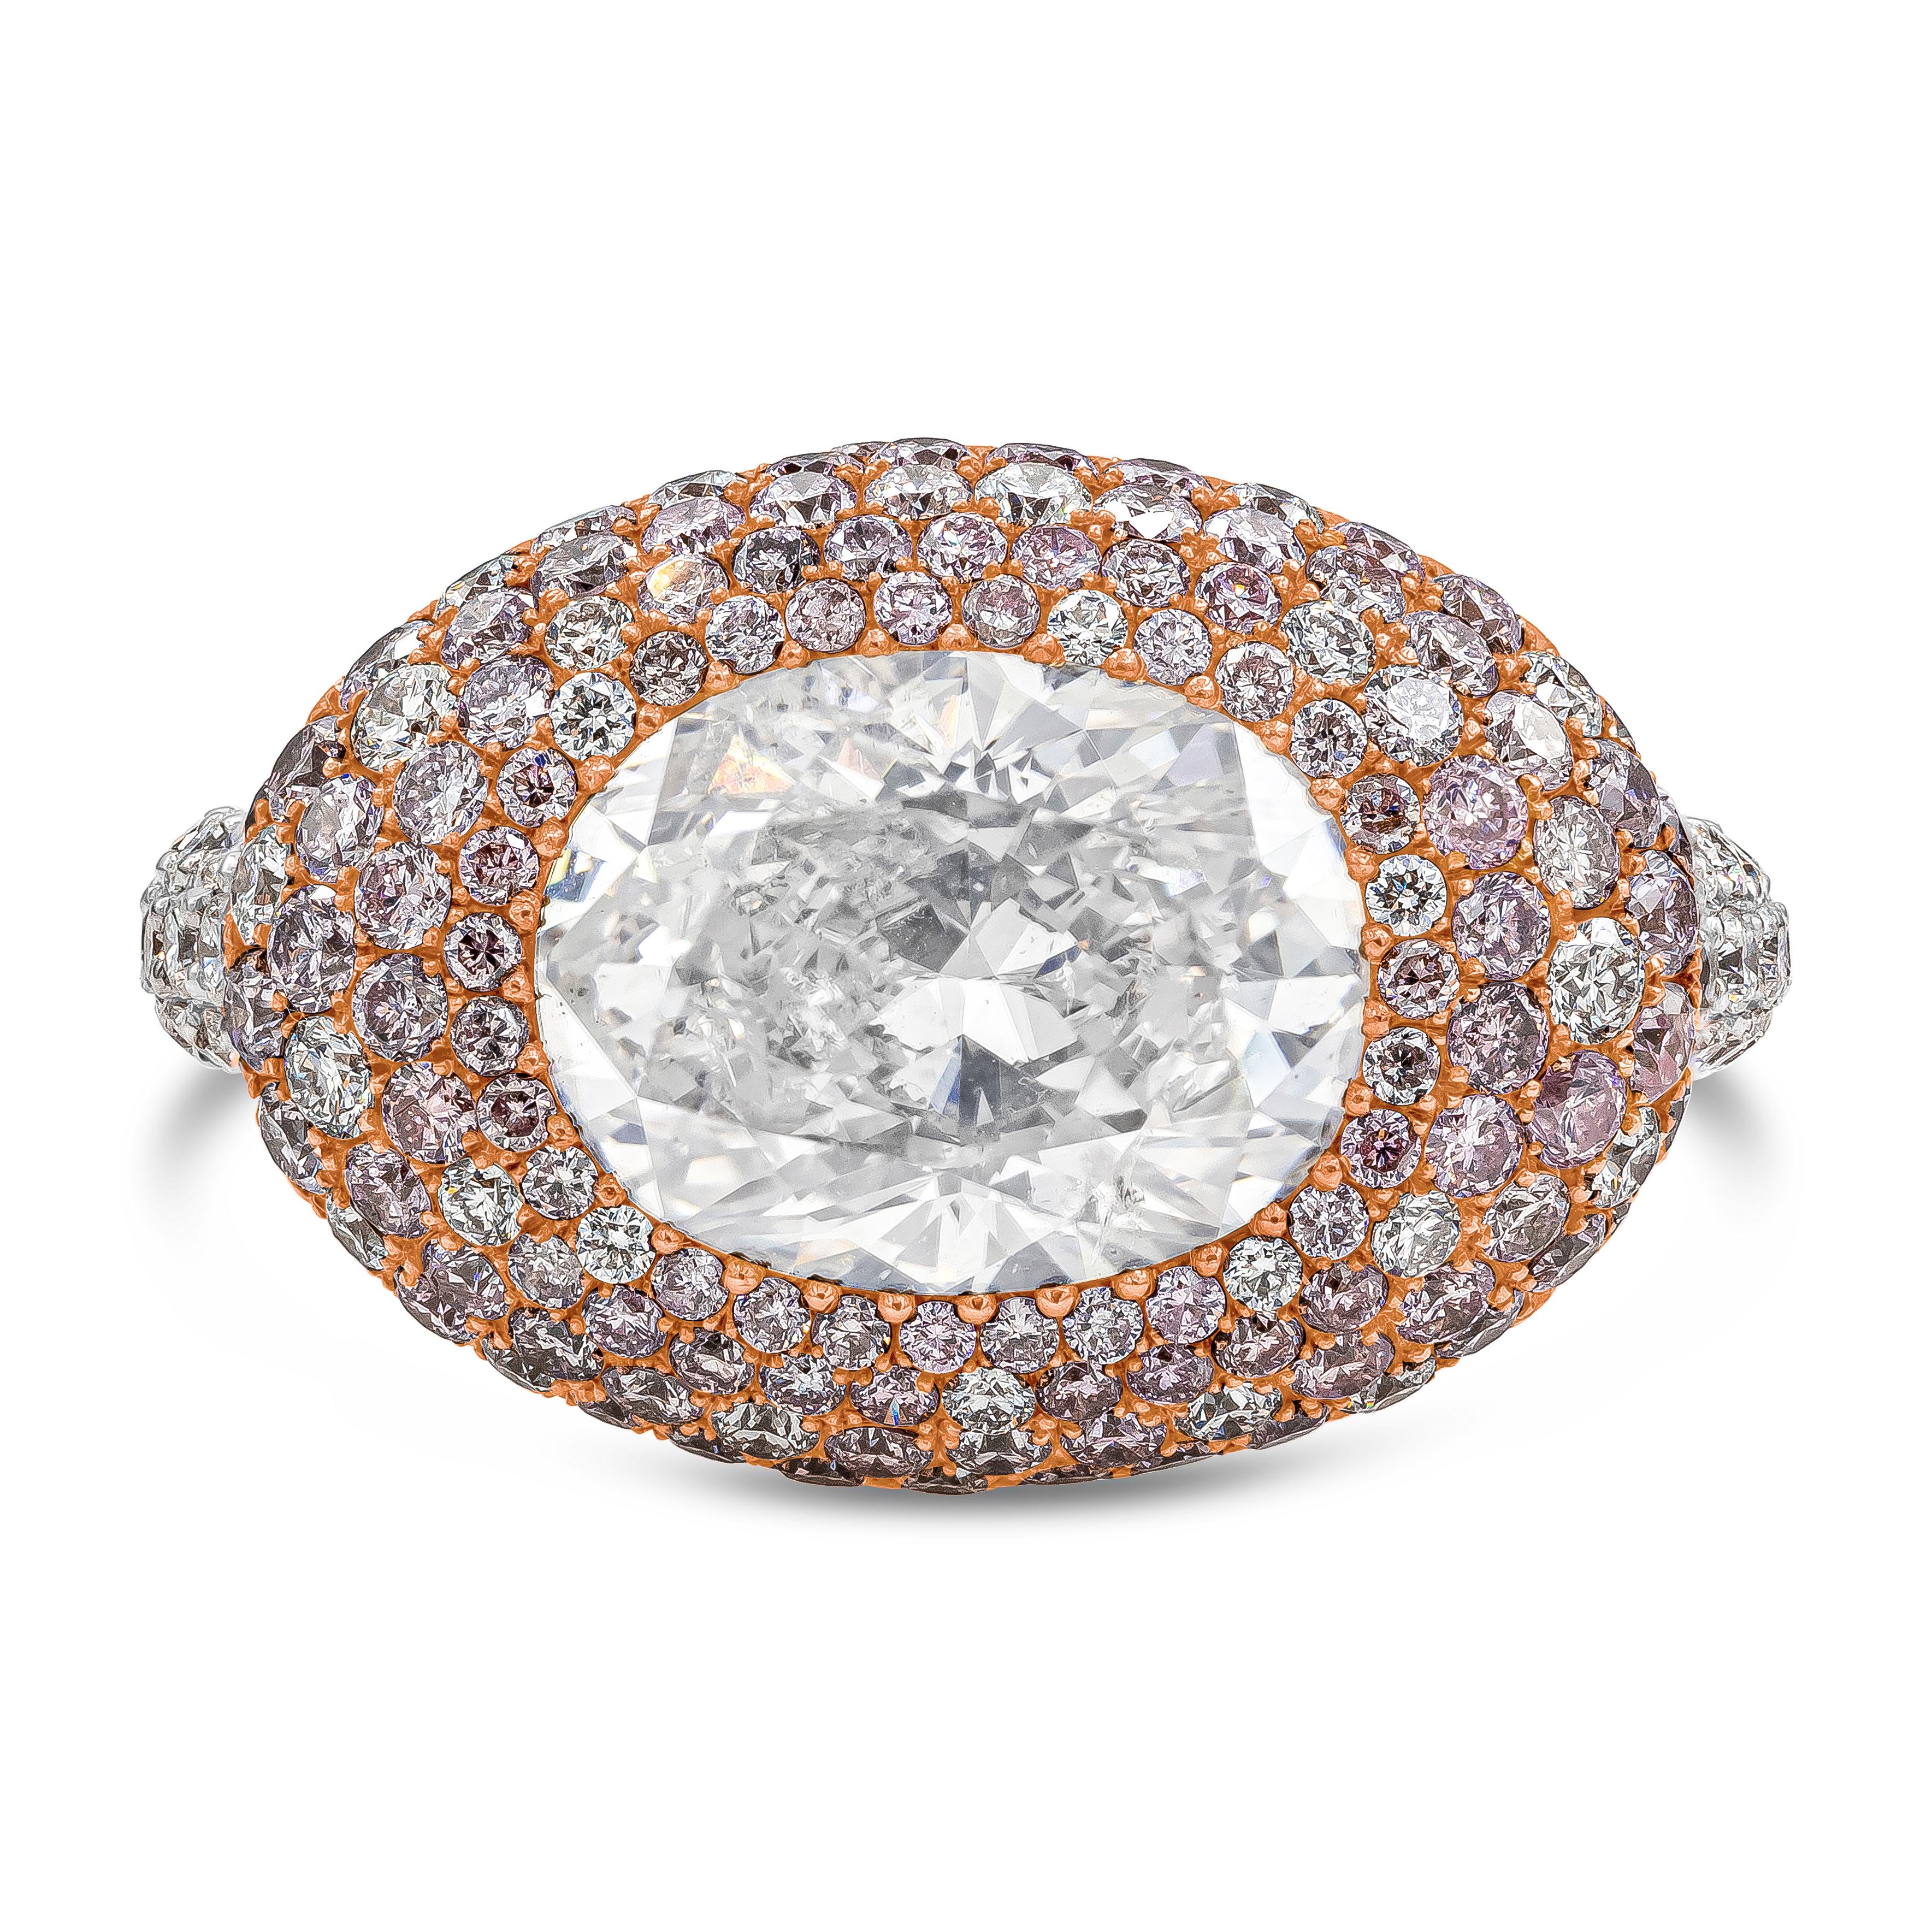 A luxurious and fashionable dome cocktail ring showcasing a 4.02 carat oval cut diamond certified by GIA as Natural Fancy White color. Set in a beautiful dome micro-pave set with brilliant white and pink diamonds that continue down the shank of the